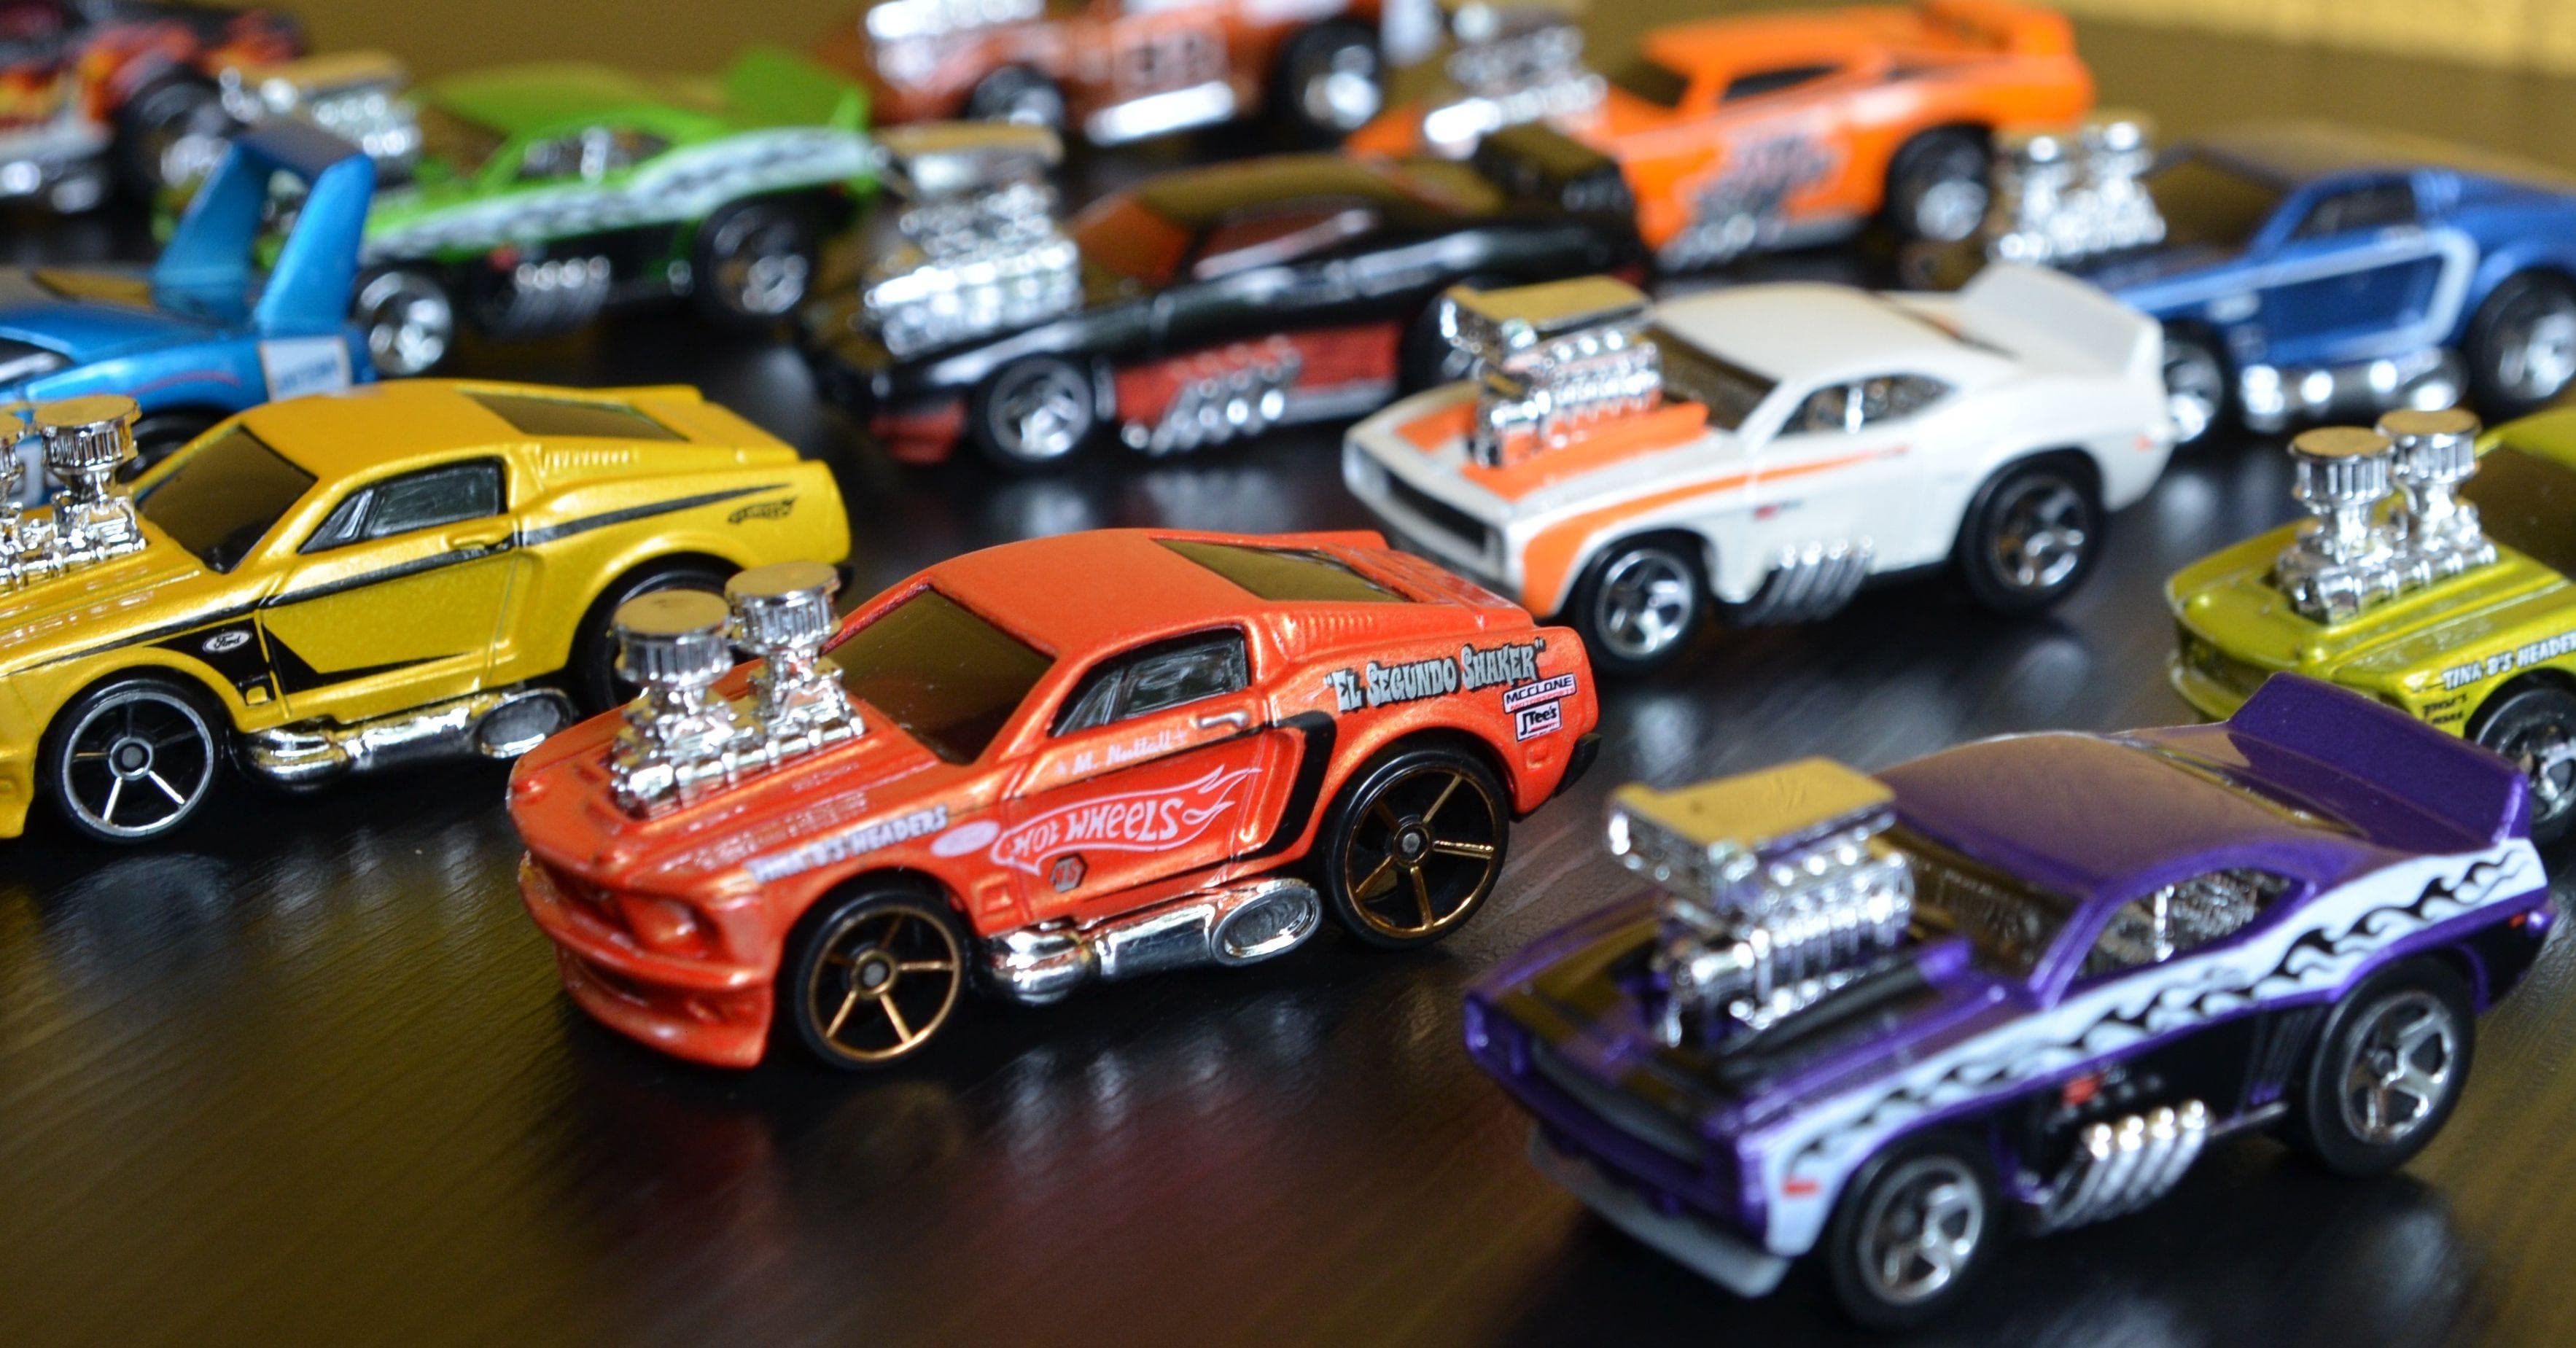 Rarest Hot Wheels Cars In The World